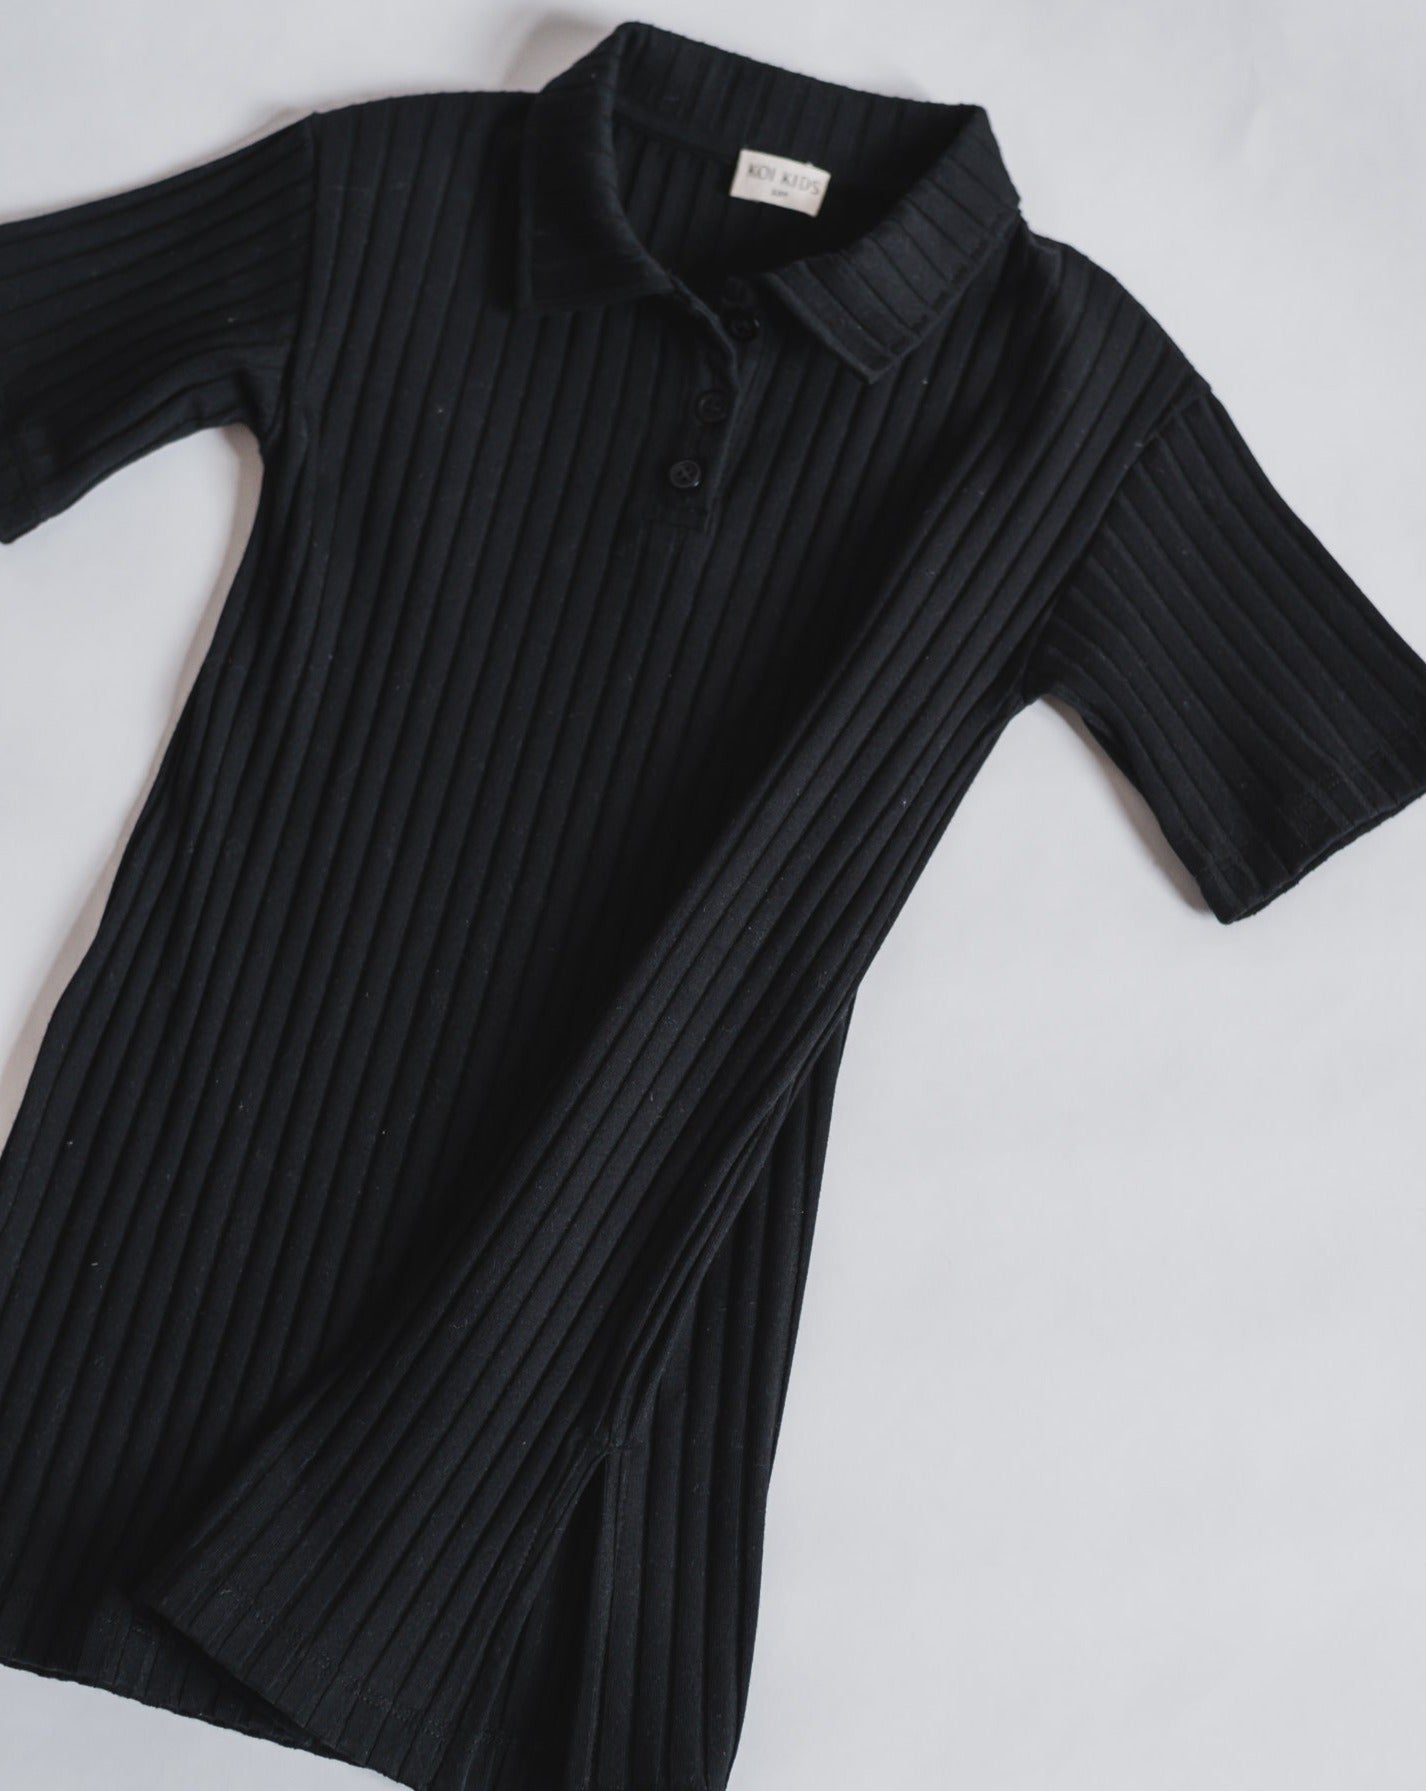 Black midi length shirt dress in a ribbed jersey fabric. Relaxed fit with elbow length sleeves and a collar neckline with 3 buttons and split hem in both sides.